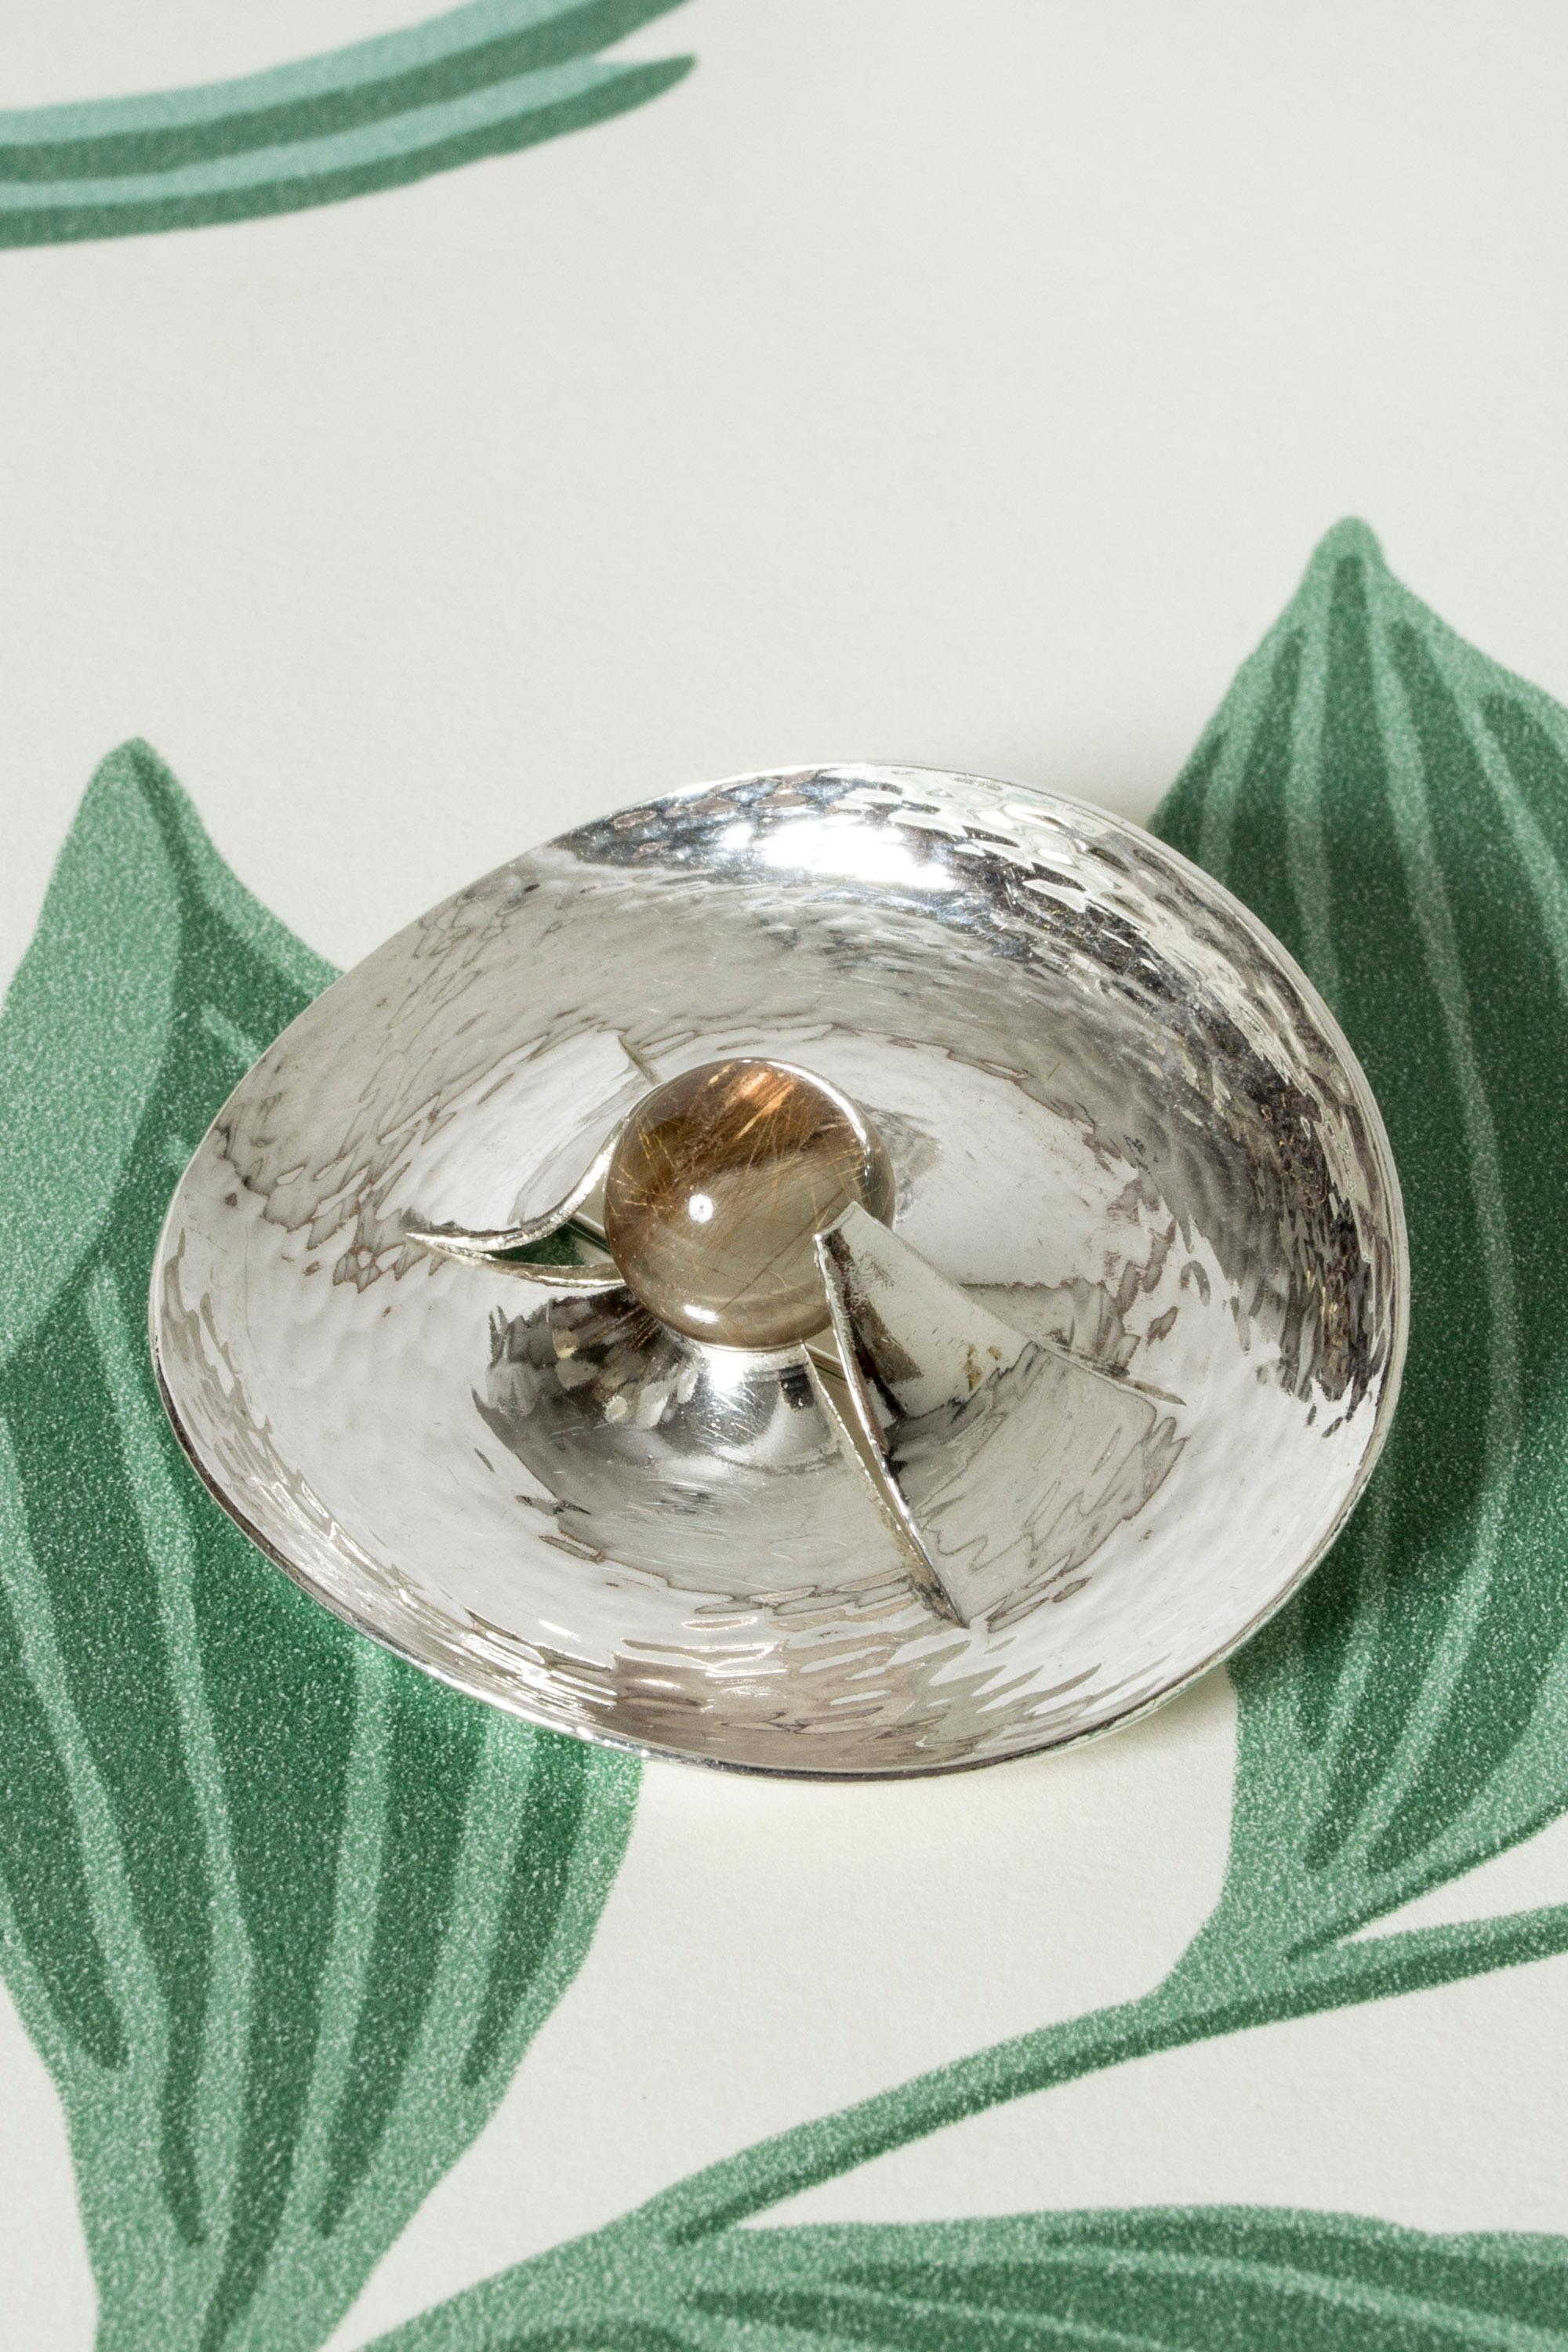 Amazing silver brooch by Elis Kauppi, in an oval form with a hammered surface that creates a rippling effect. A round rutilated quartz stone in the center seems to be emerging out of the silver.